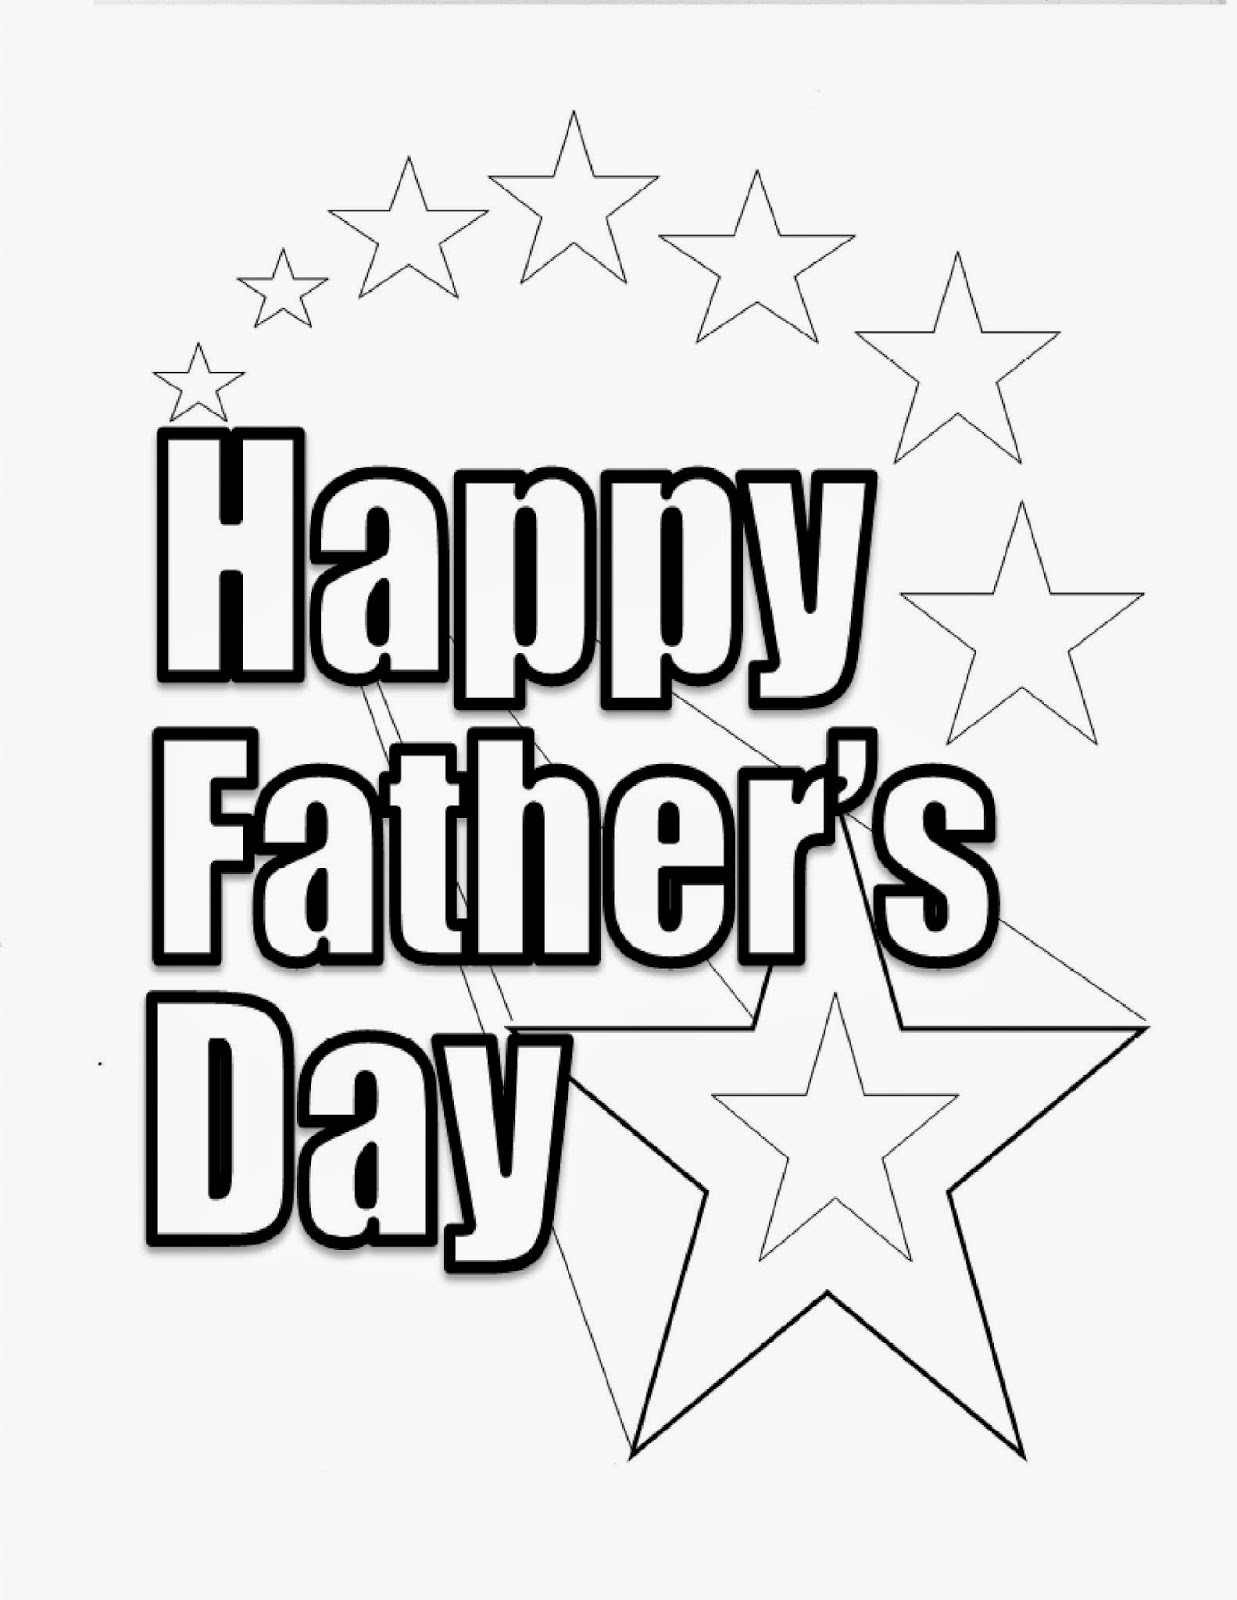 Free Printable Fathers Day Coloring Pages
 Let It Shine Father s Day Coloring Pages